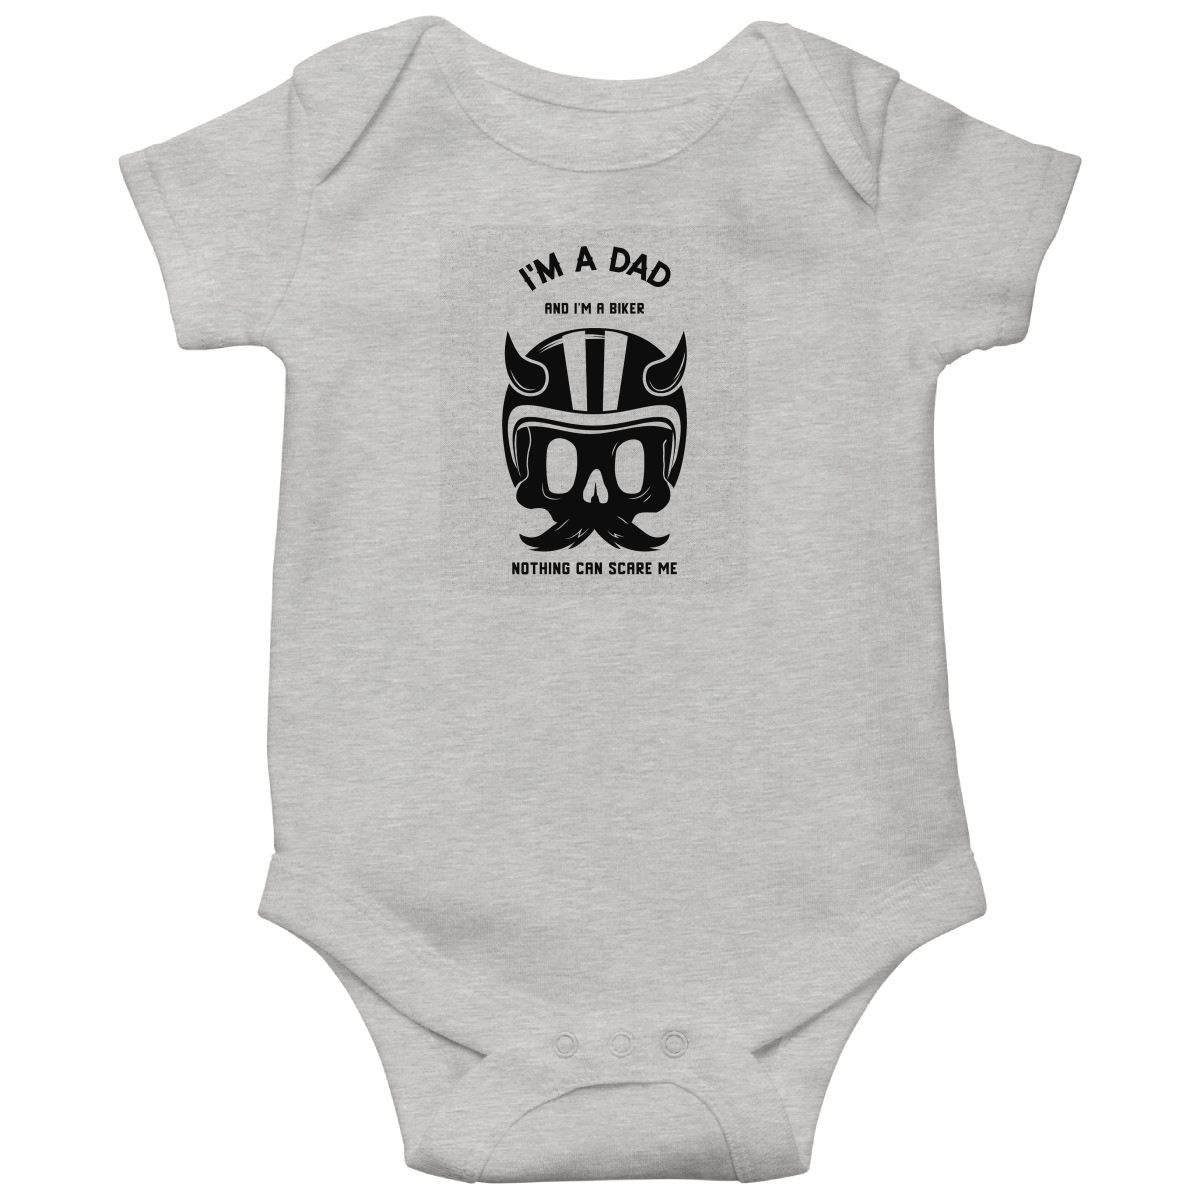 I'm a dad and a biker Baby Bodysuits | Gray